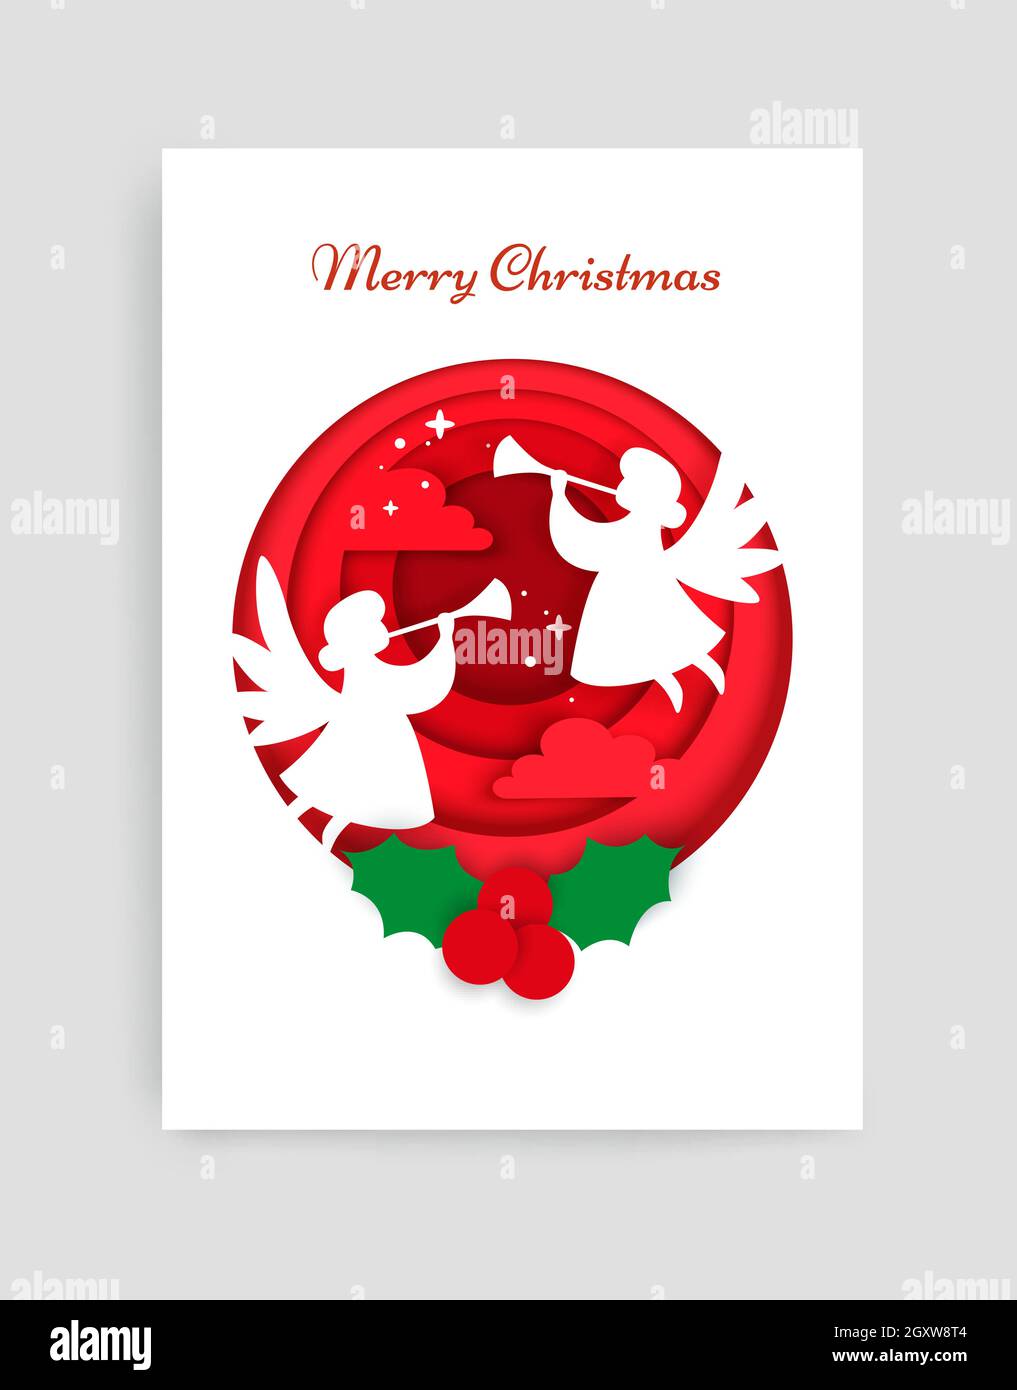 Merry Christmas card vector design template. Paper cut craft style winter composition of white angel silhouettes and holly berries in circle. Stock Vector